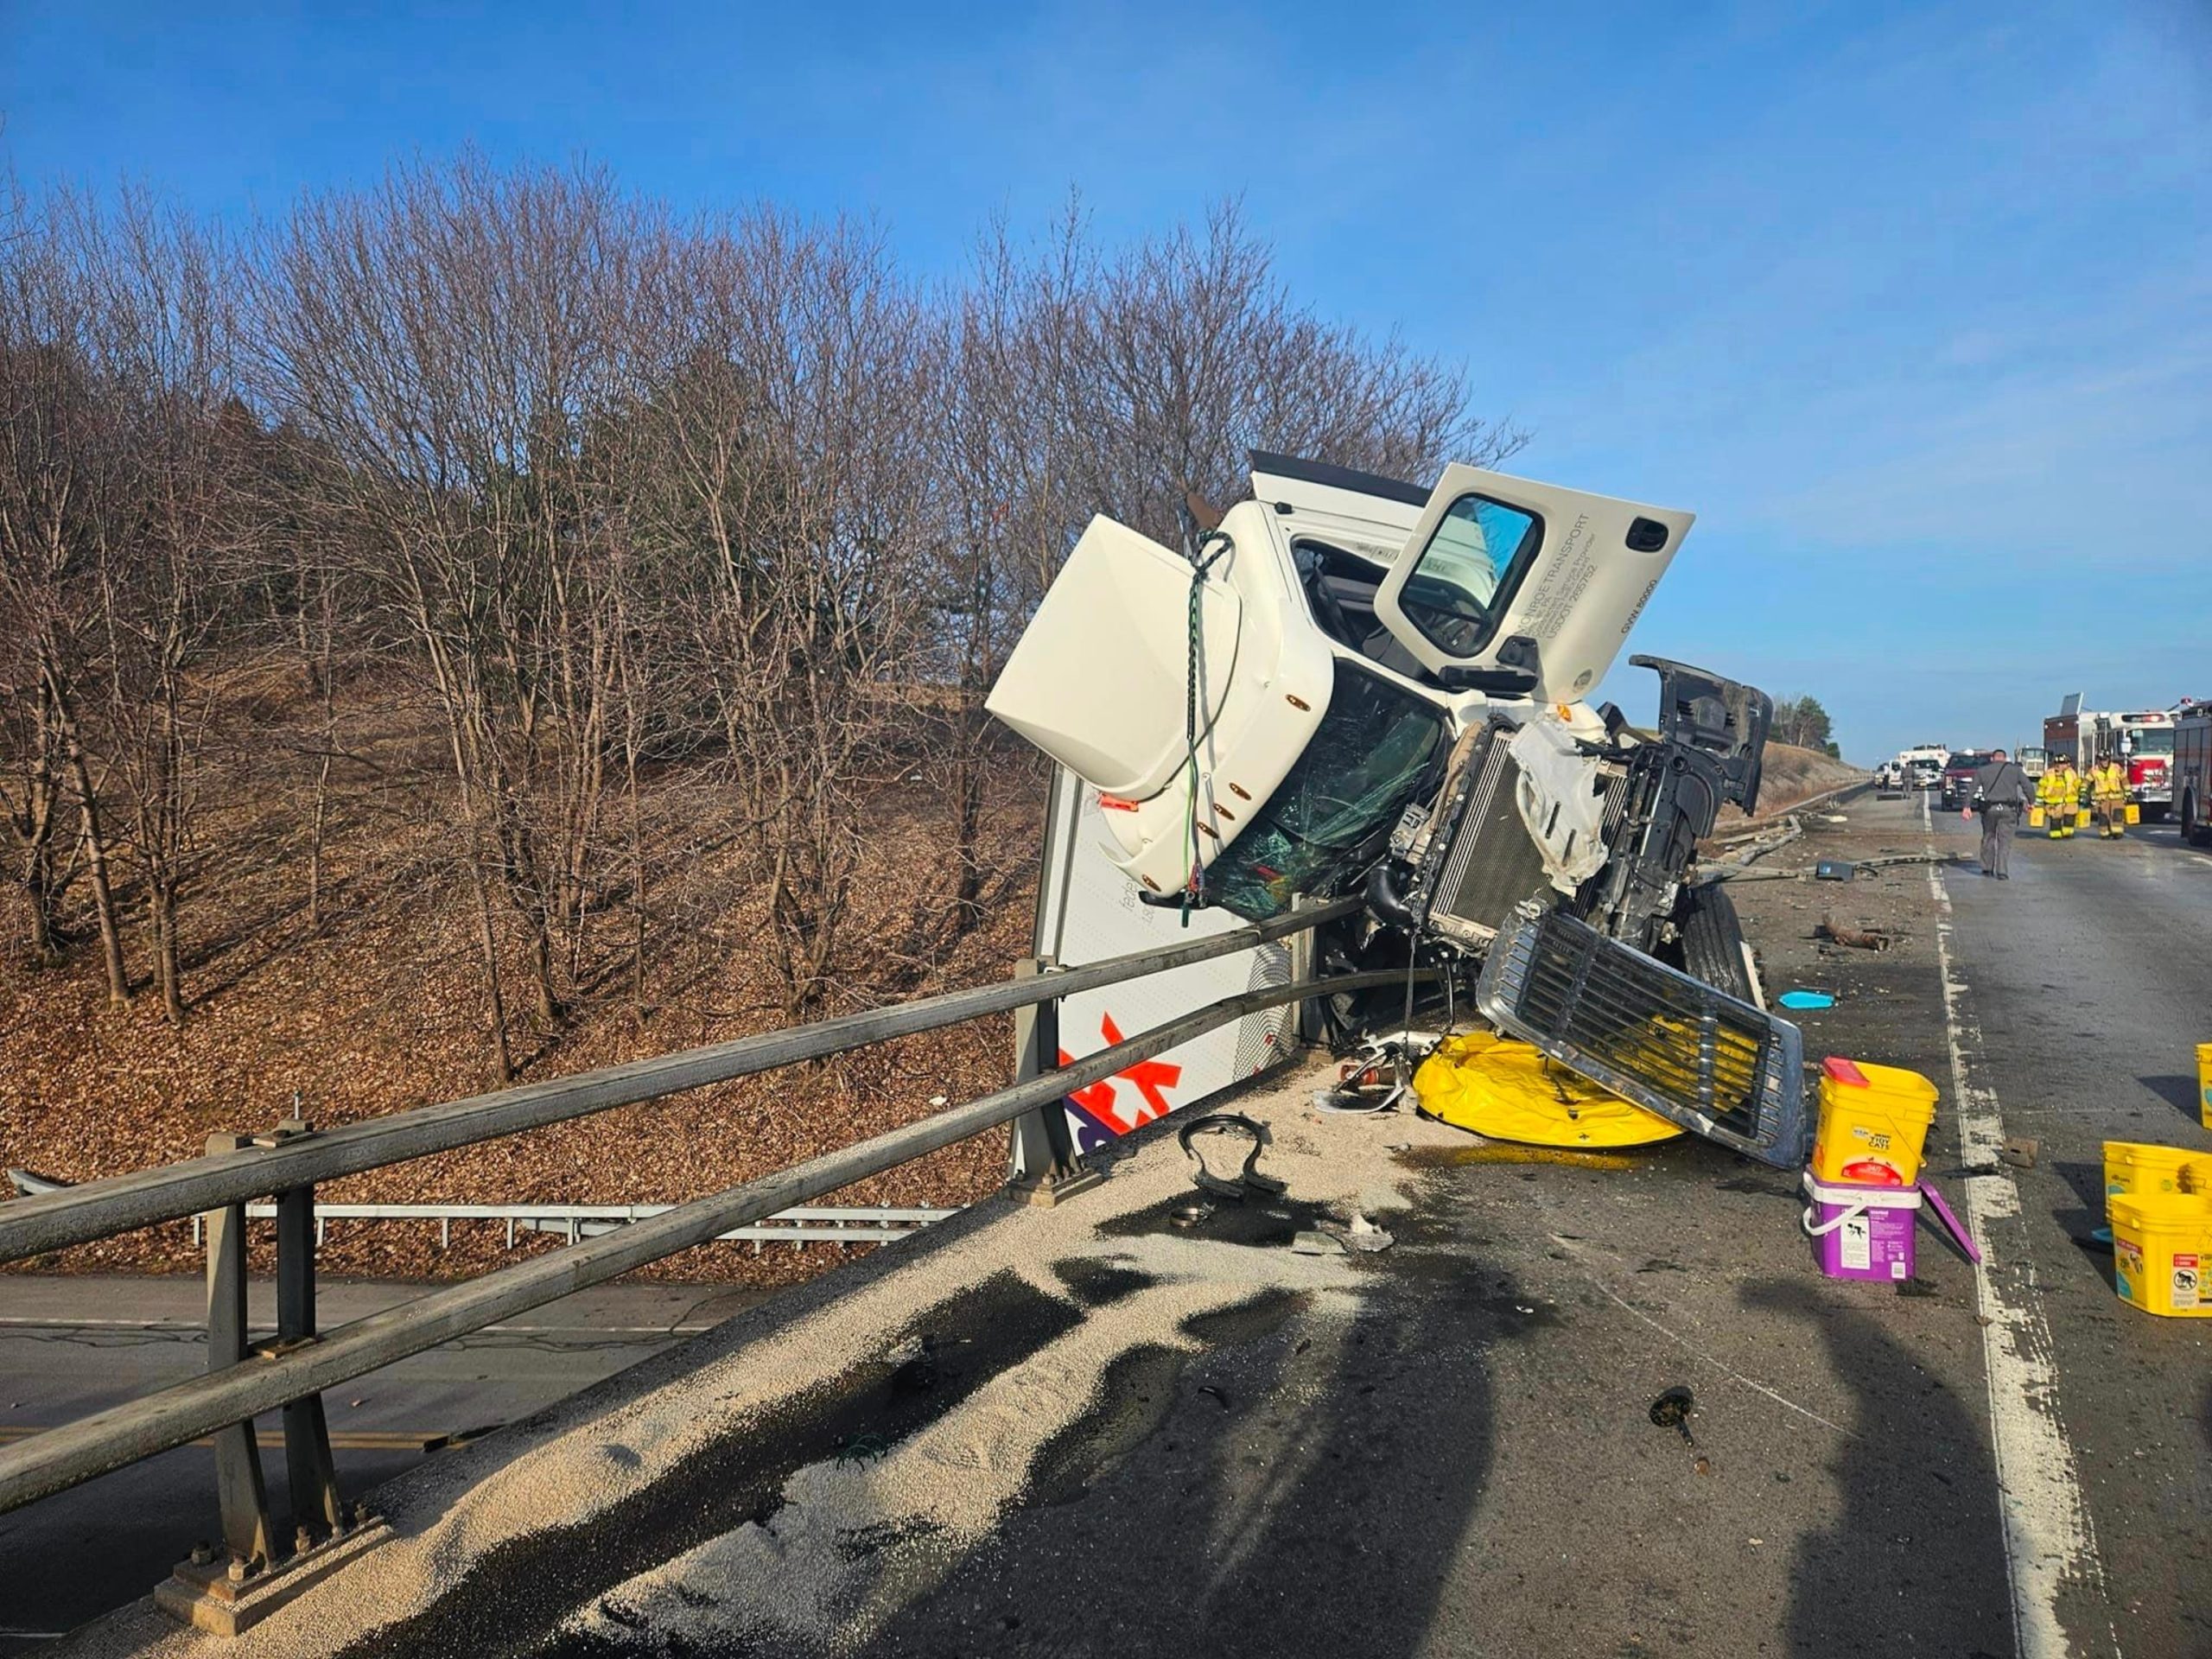 Officials report that 5 individuals, including an infant, sustain injuries following FedEx semitrailer rollover on New York bridge.